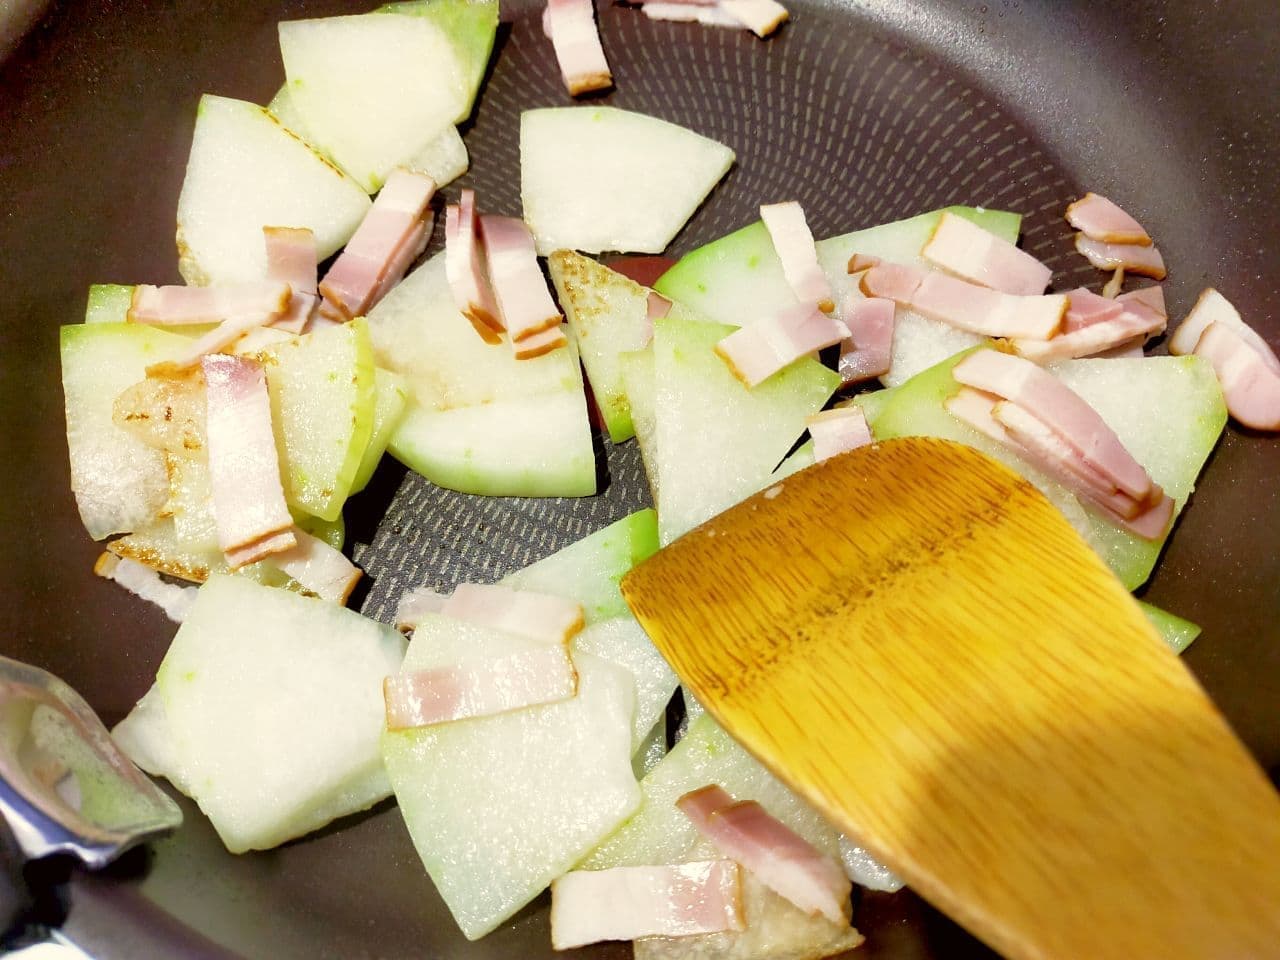 "Wax gourd and bacon stir-fried with garlic butter" recipe